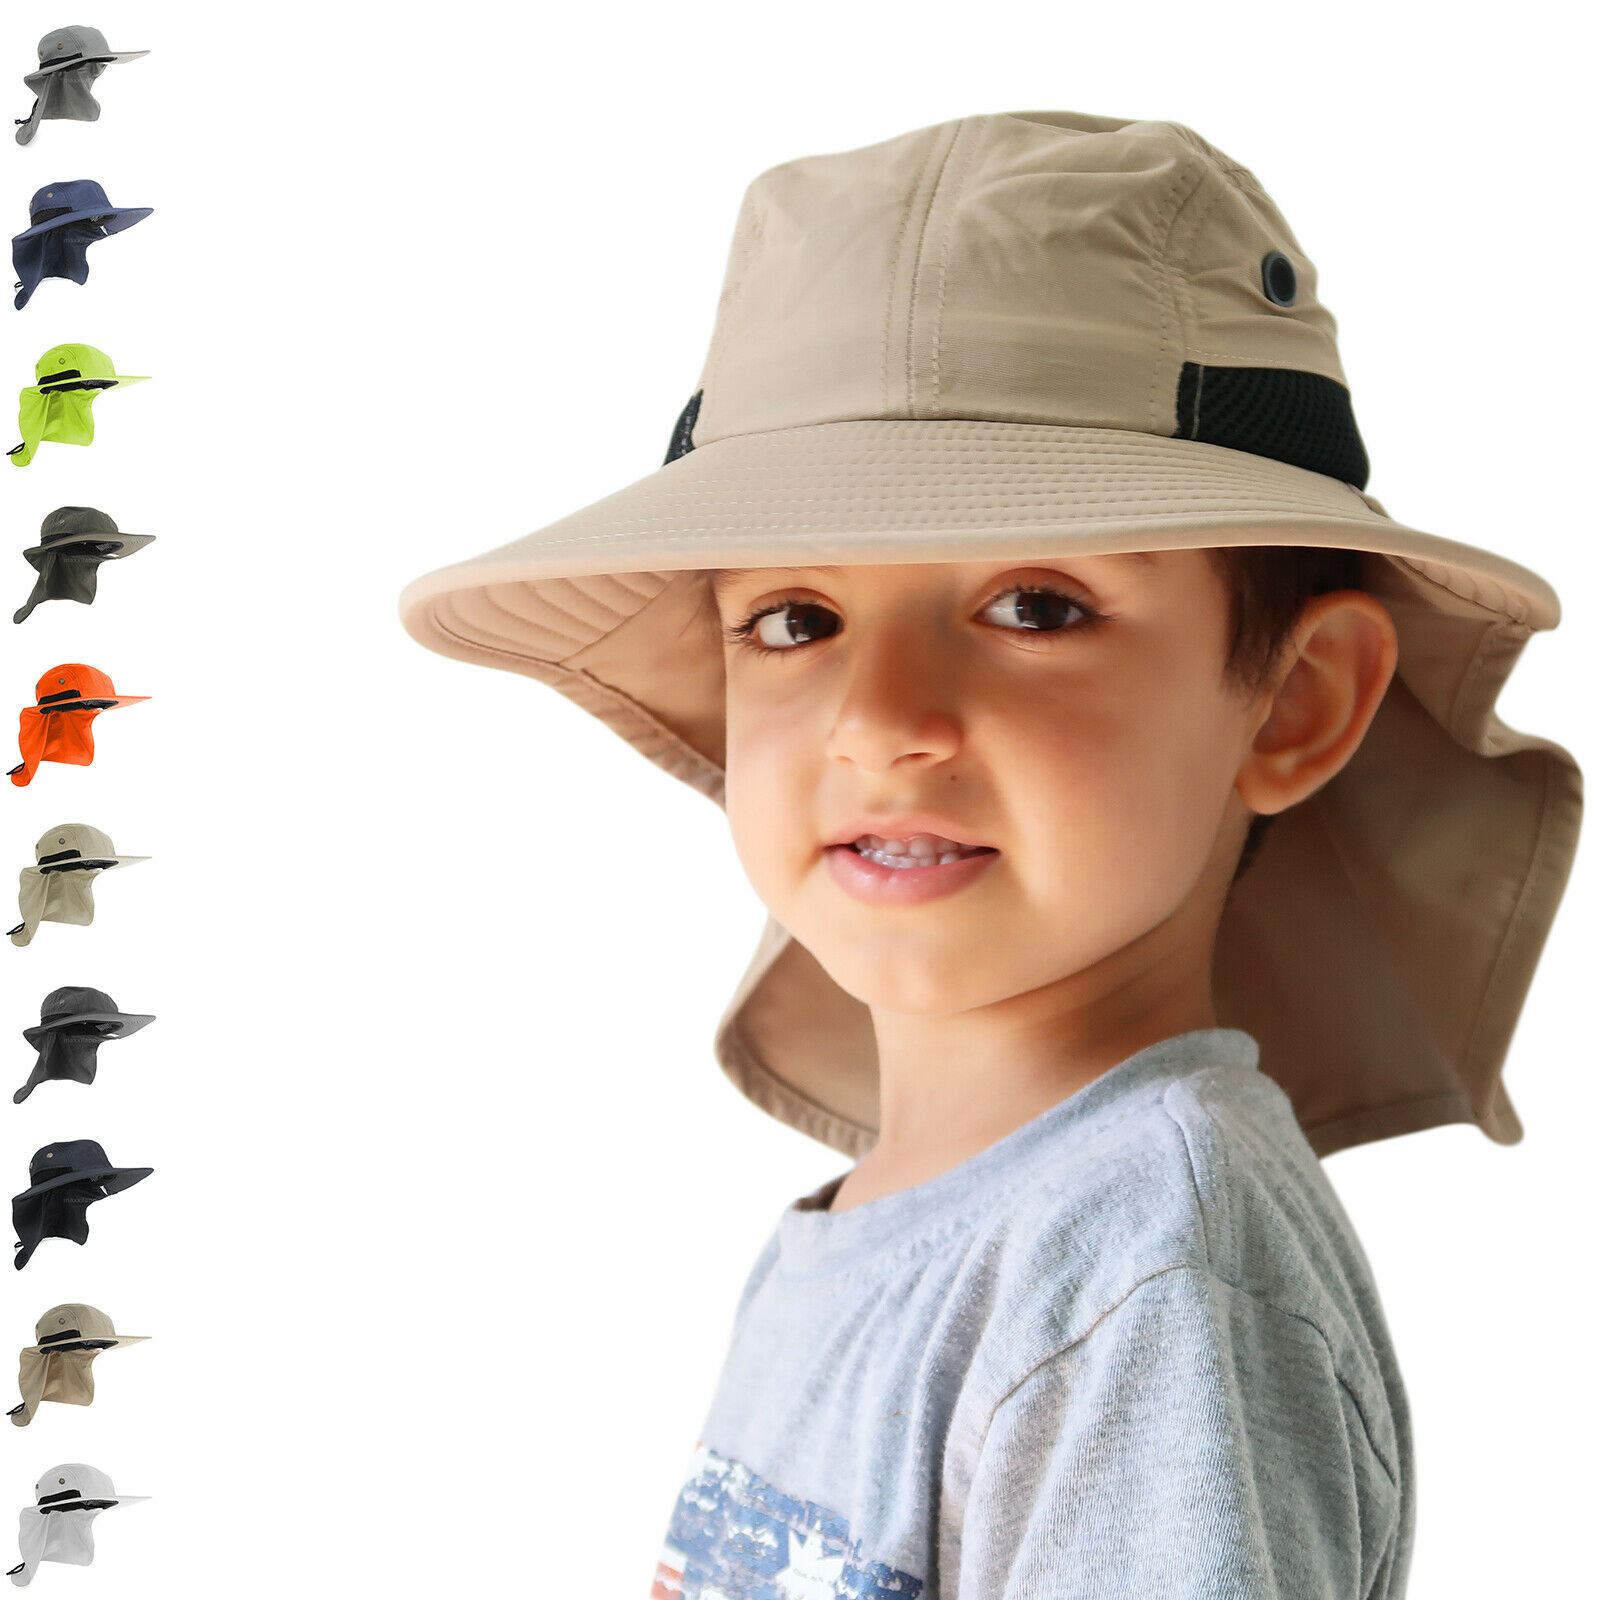 Boonie Snap Hat For Kids Wide Brim Visor Neck Cover Sun Flap Cap For Outdoors